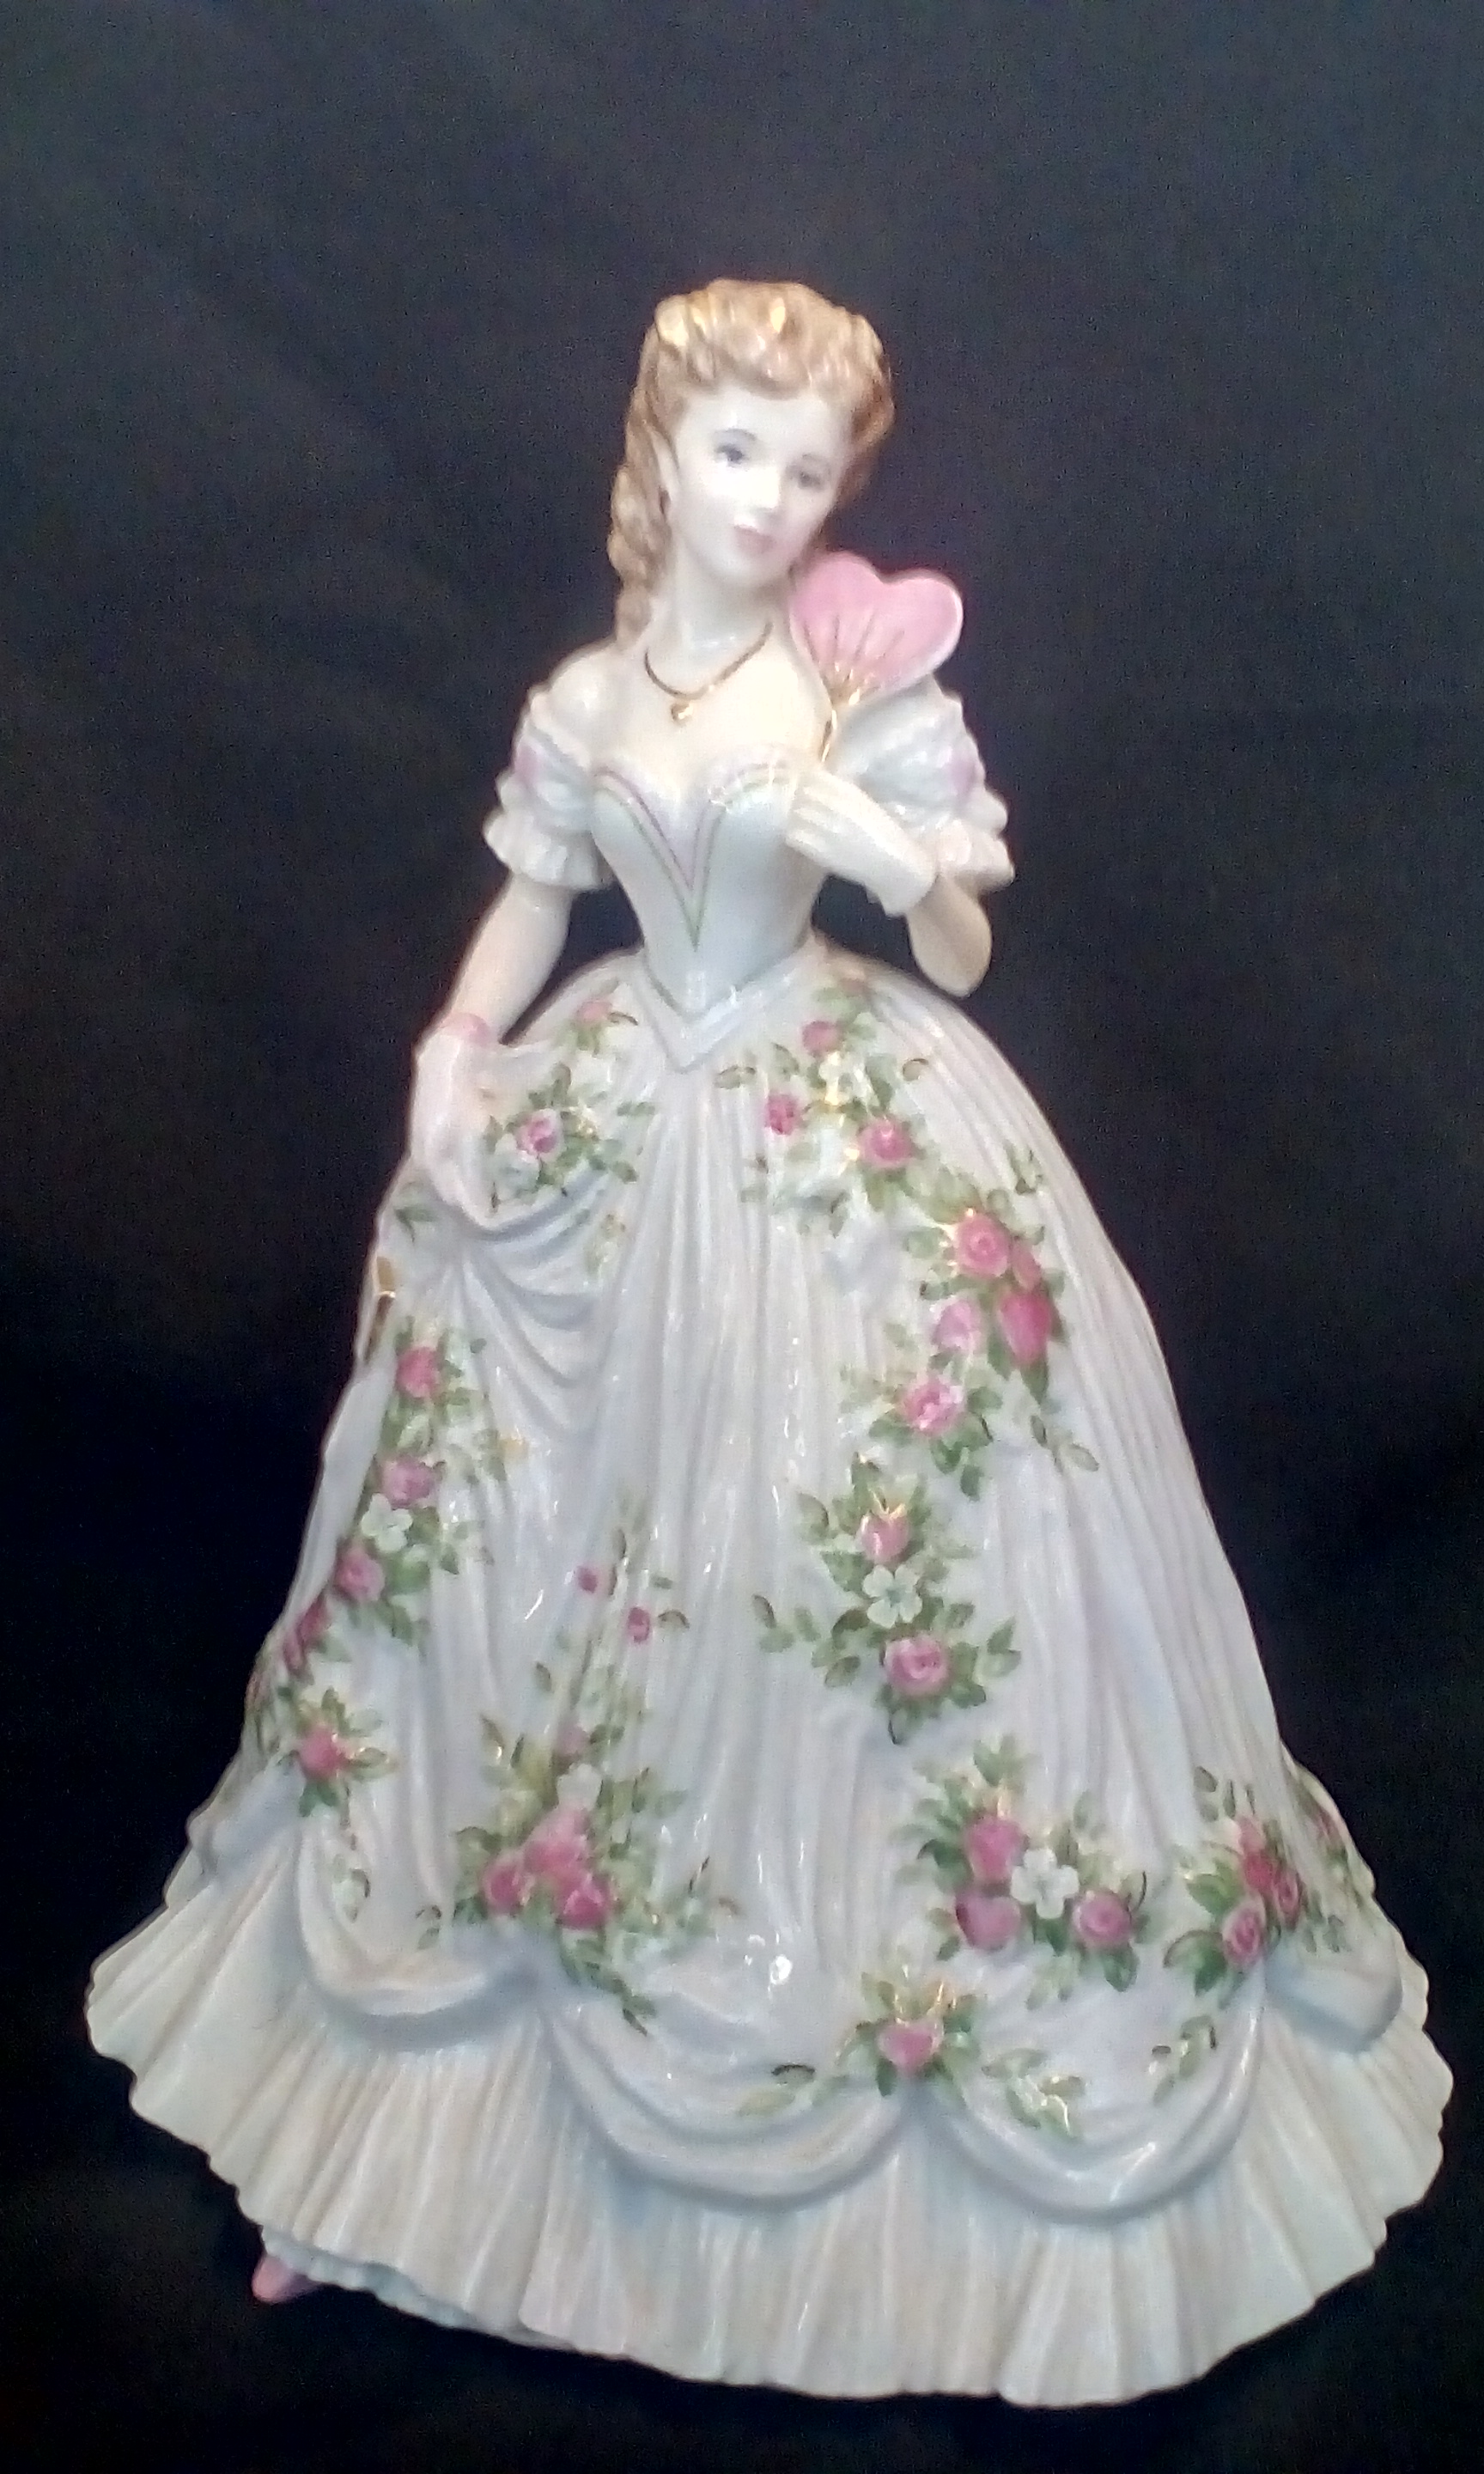 Royal Worcester limited edition figure 5,016/12,50